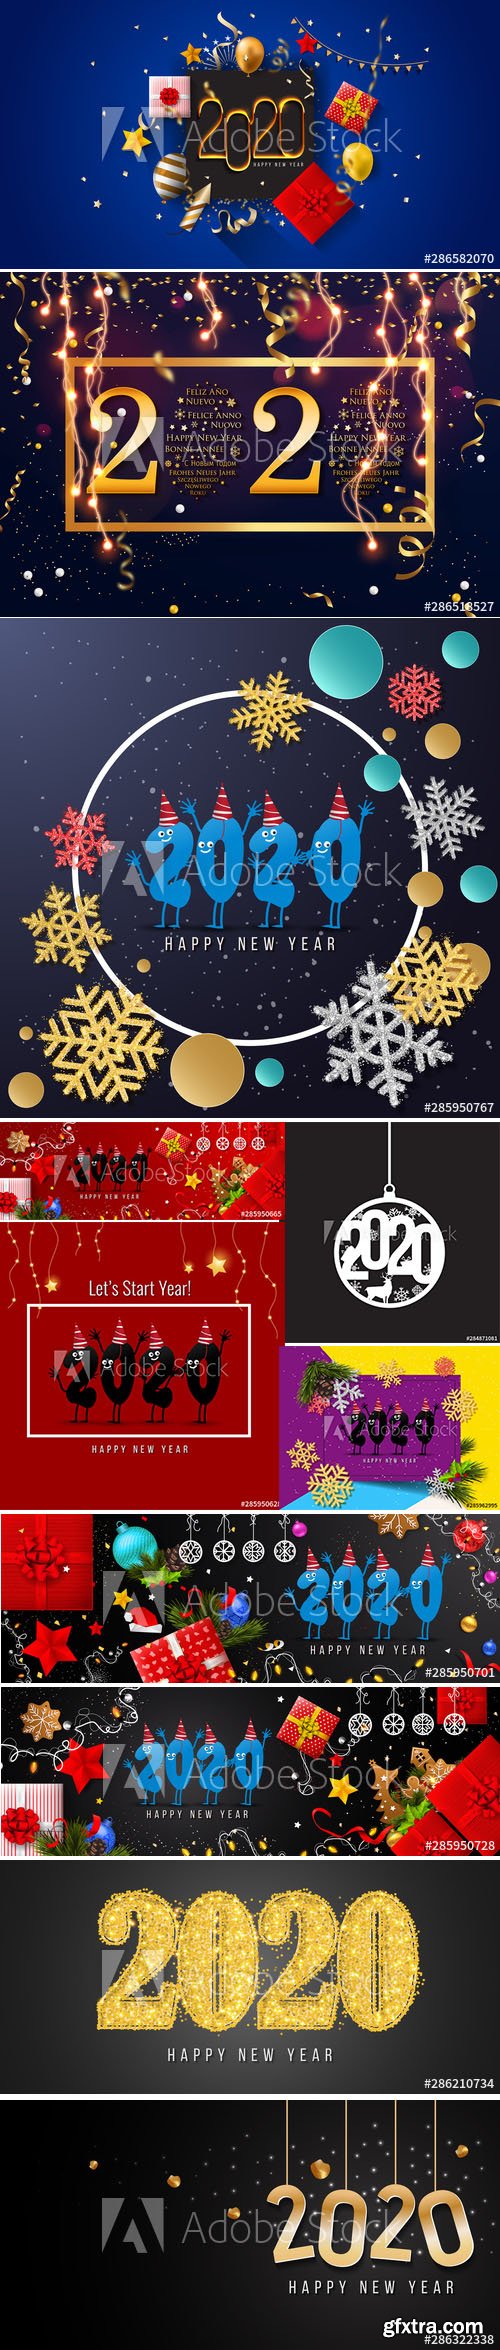 2020 Happy New Year Greeting Card and New Year Background vol.3